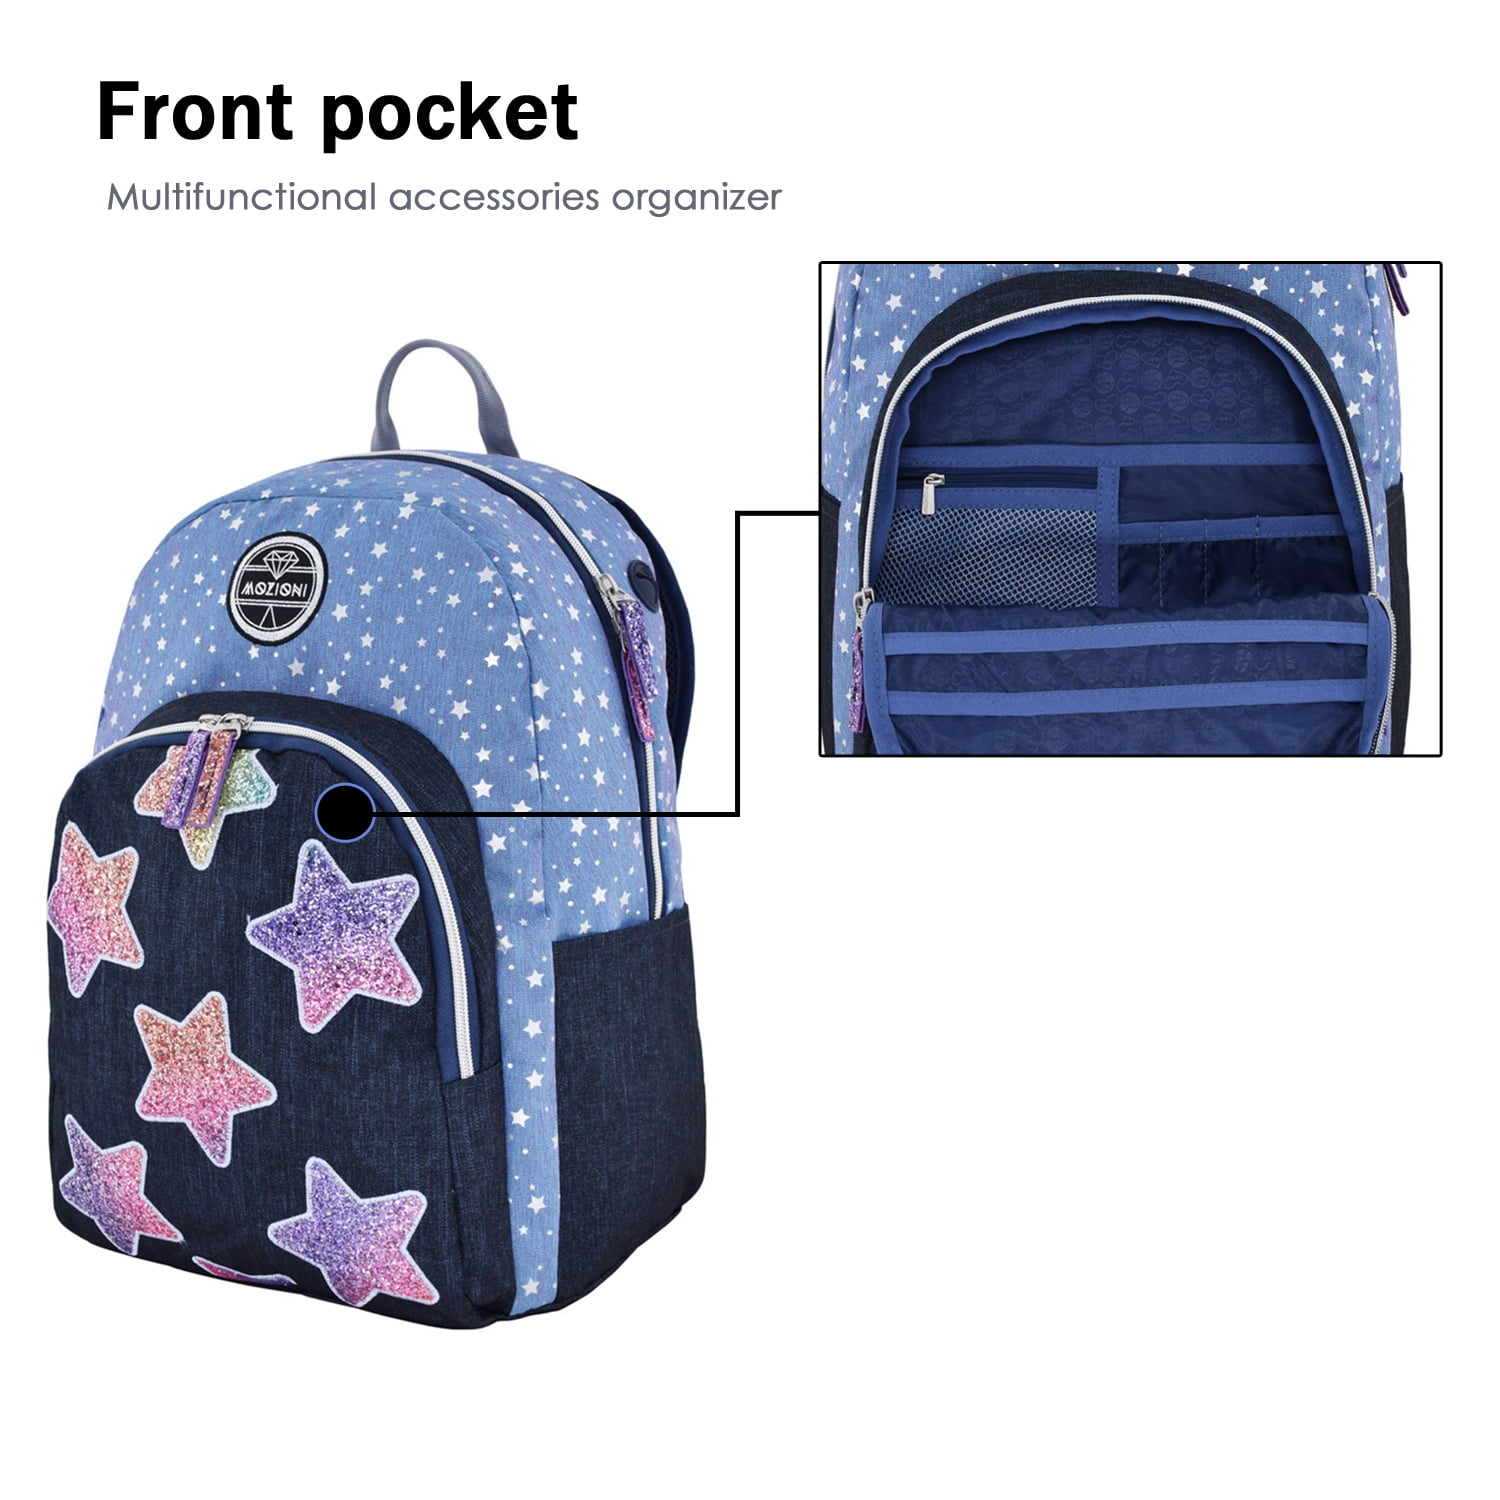 Cute Lightweight Teen School Daypack MOZIONI Women Backpack-Bag for Girls Women College /& Office Bags Classic Basic Casual Bag Silver Printing cat Pattern Pack Travel Pocket